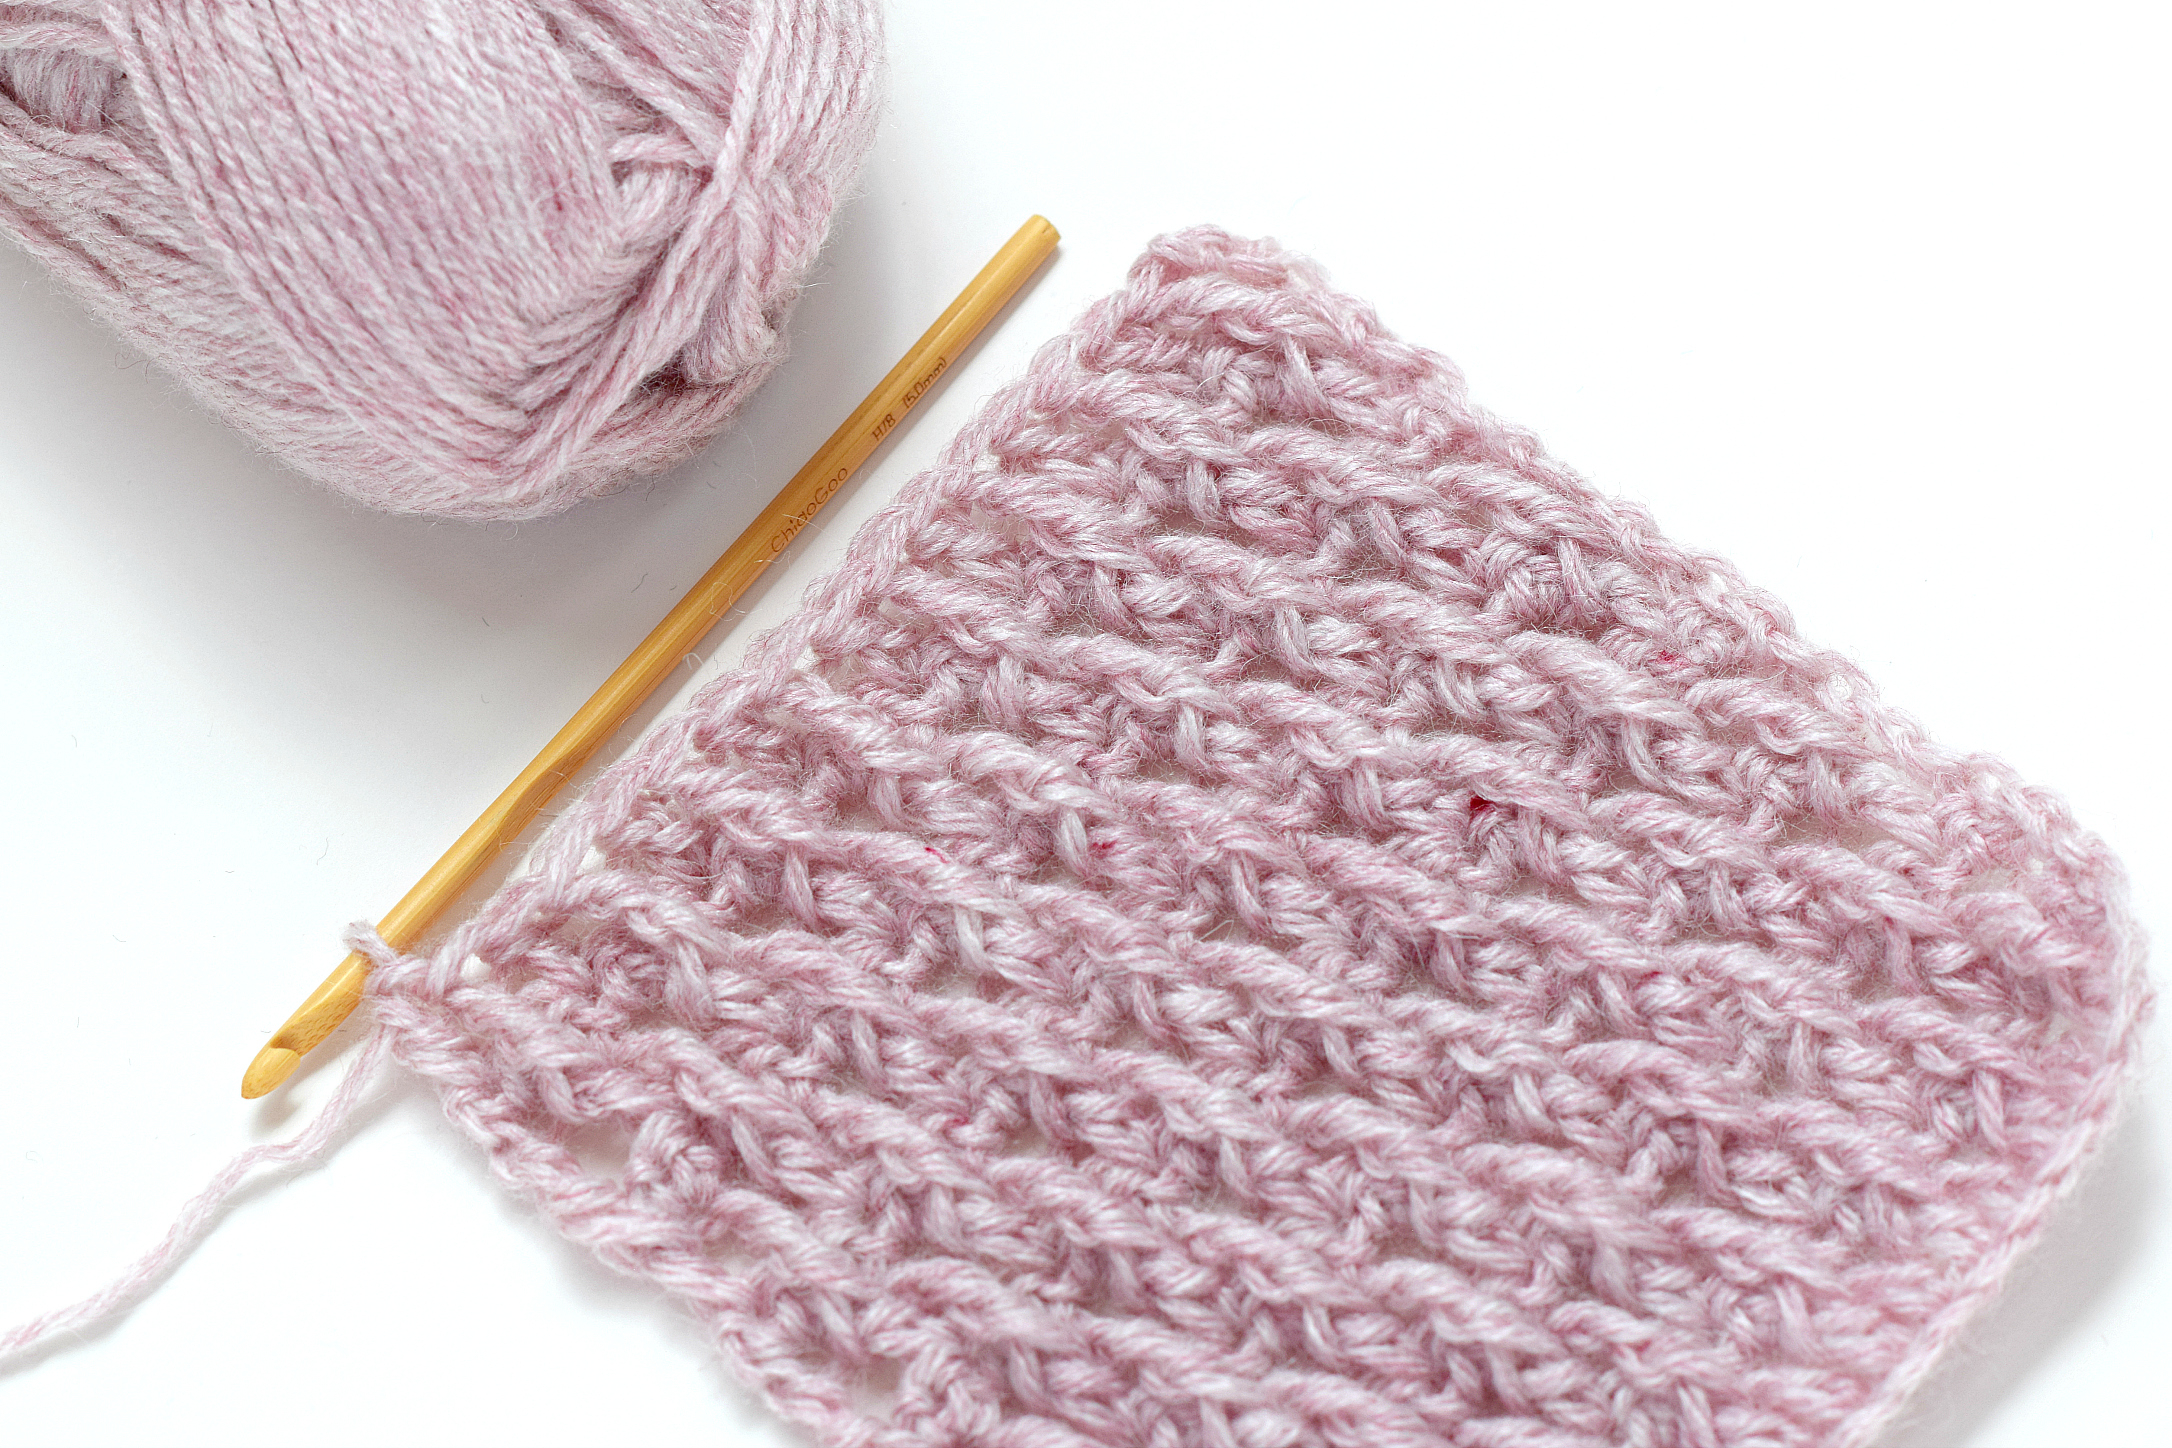 Ripple Pattern Crochet How To Crochet The Raised Ripple Stitch Mama In A Stitch